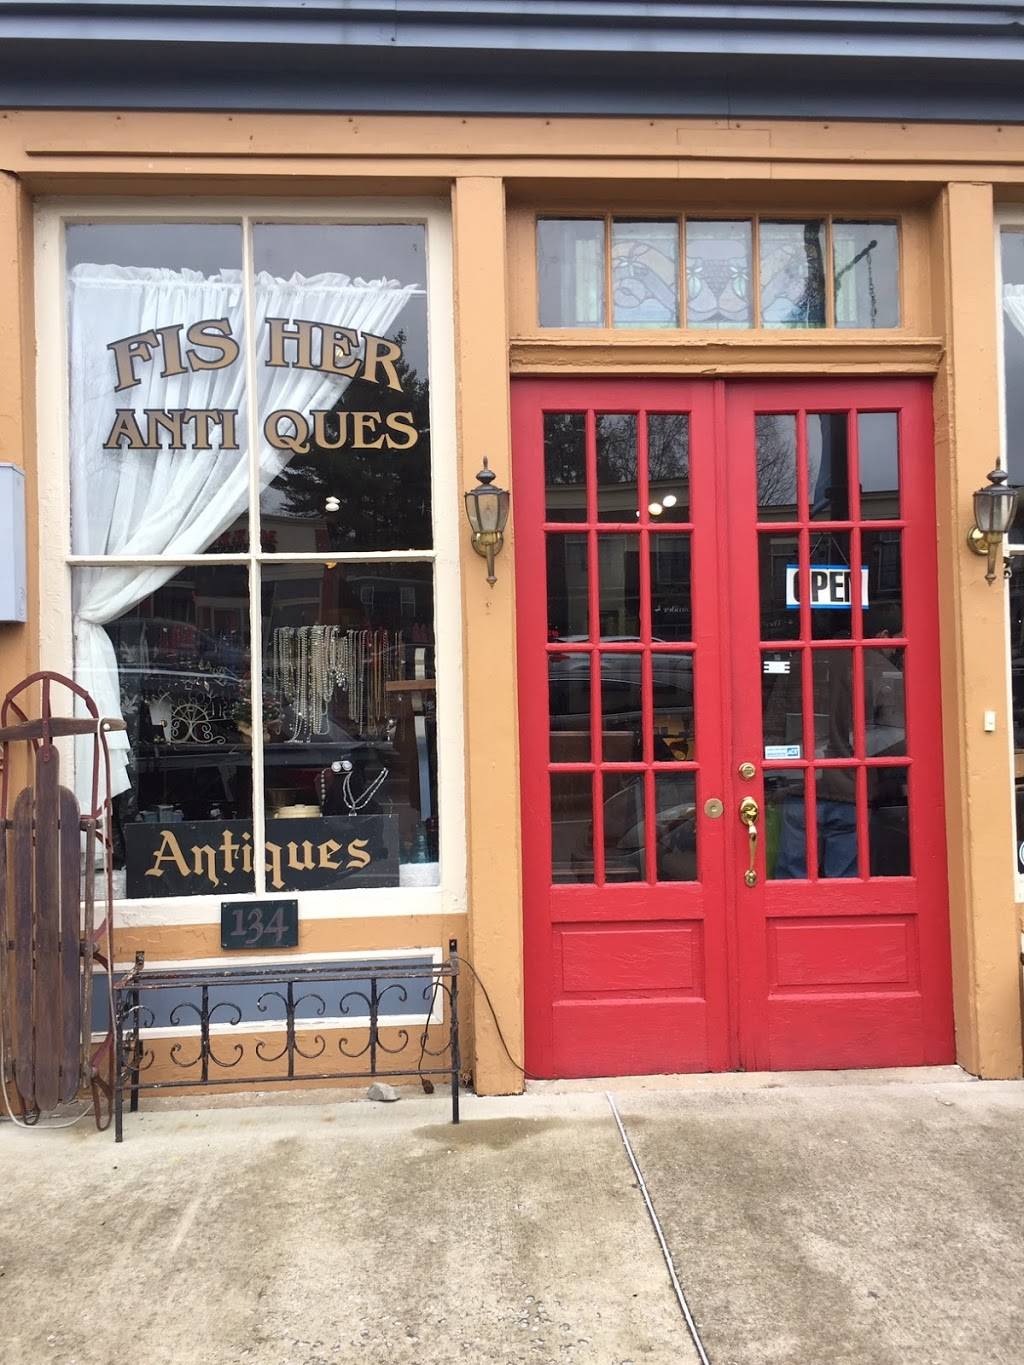 Fisher Antiques | 134 E Main St, Midway, KY 40347 | Phone: (859) 475-7440